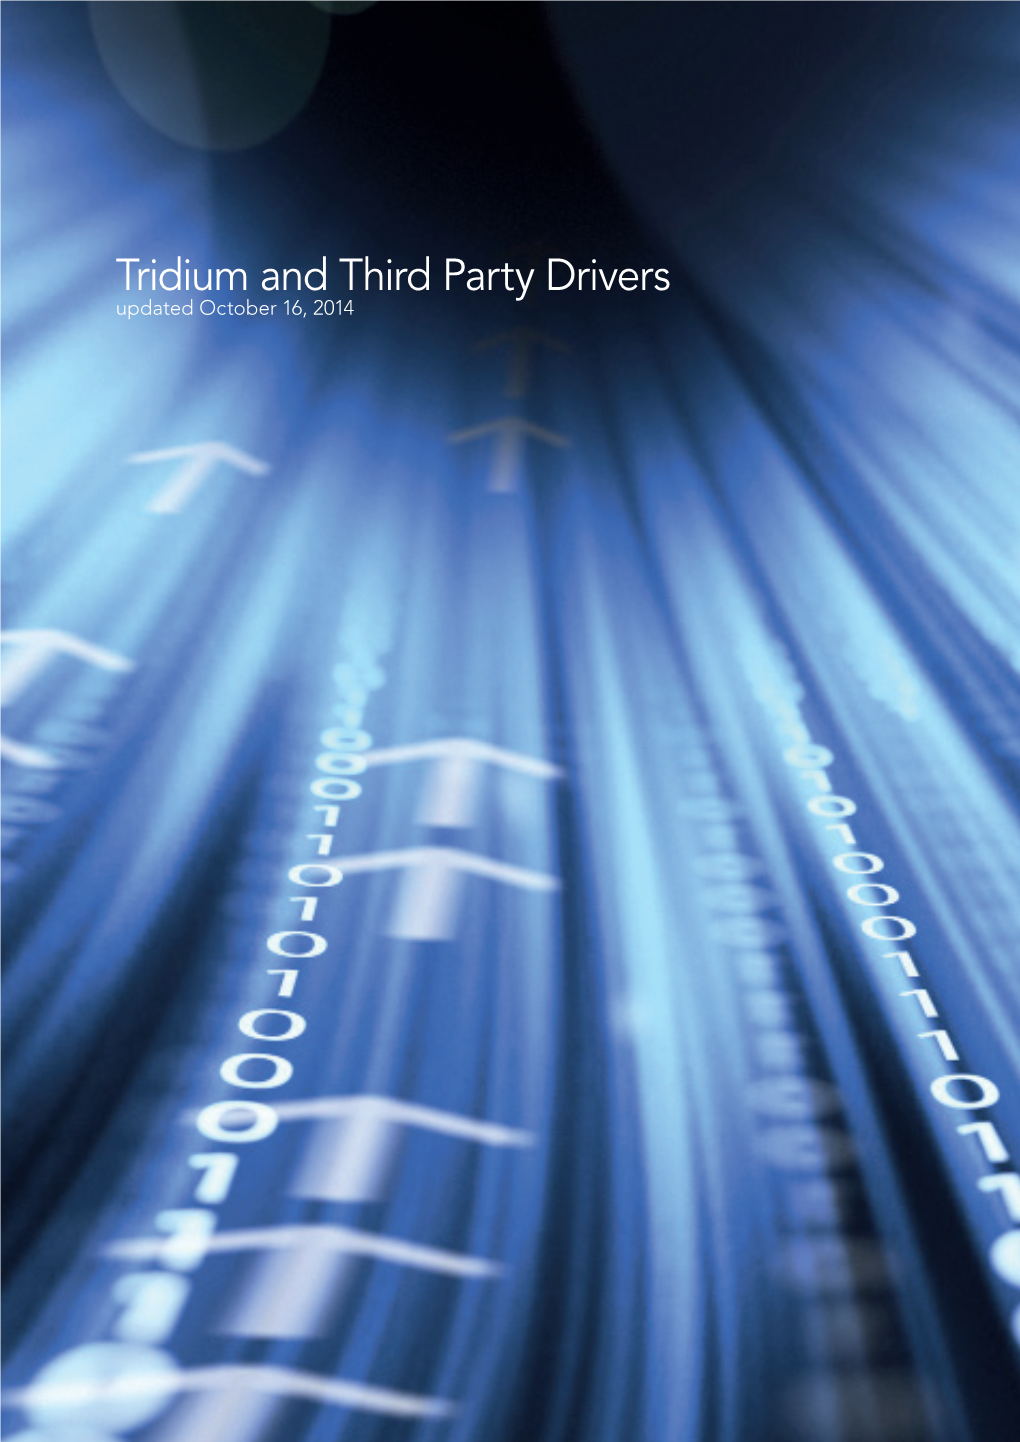 Tridium and Third Party Drivers